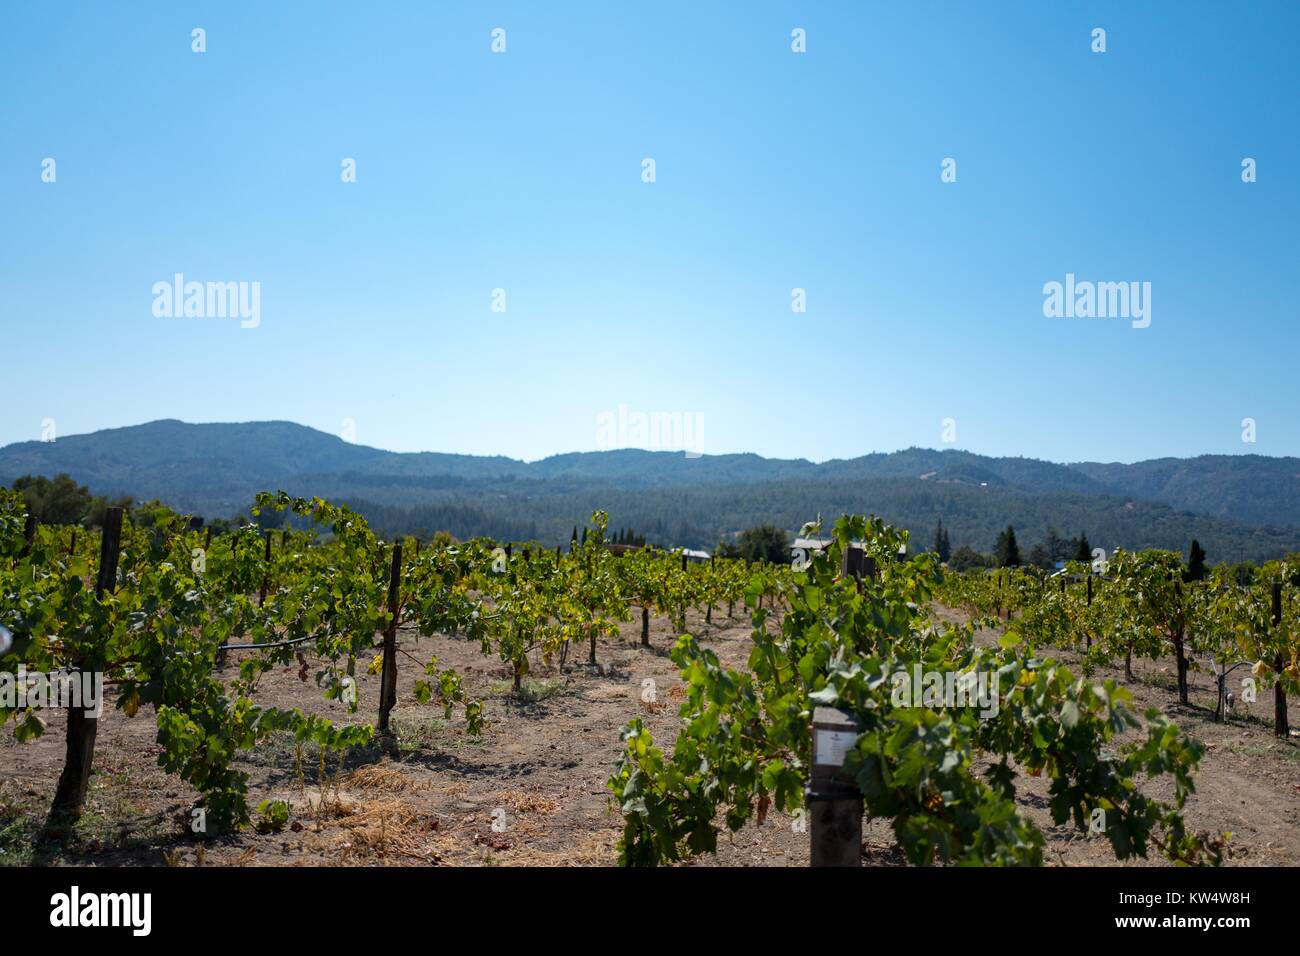 Vineyard with rows of wine grape vines in the Napa Valley, Saint Helena, California, September 10, 2016. Stock Photo